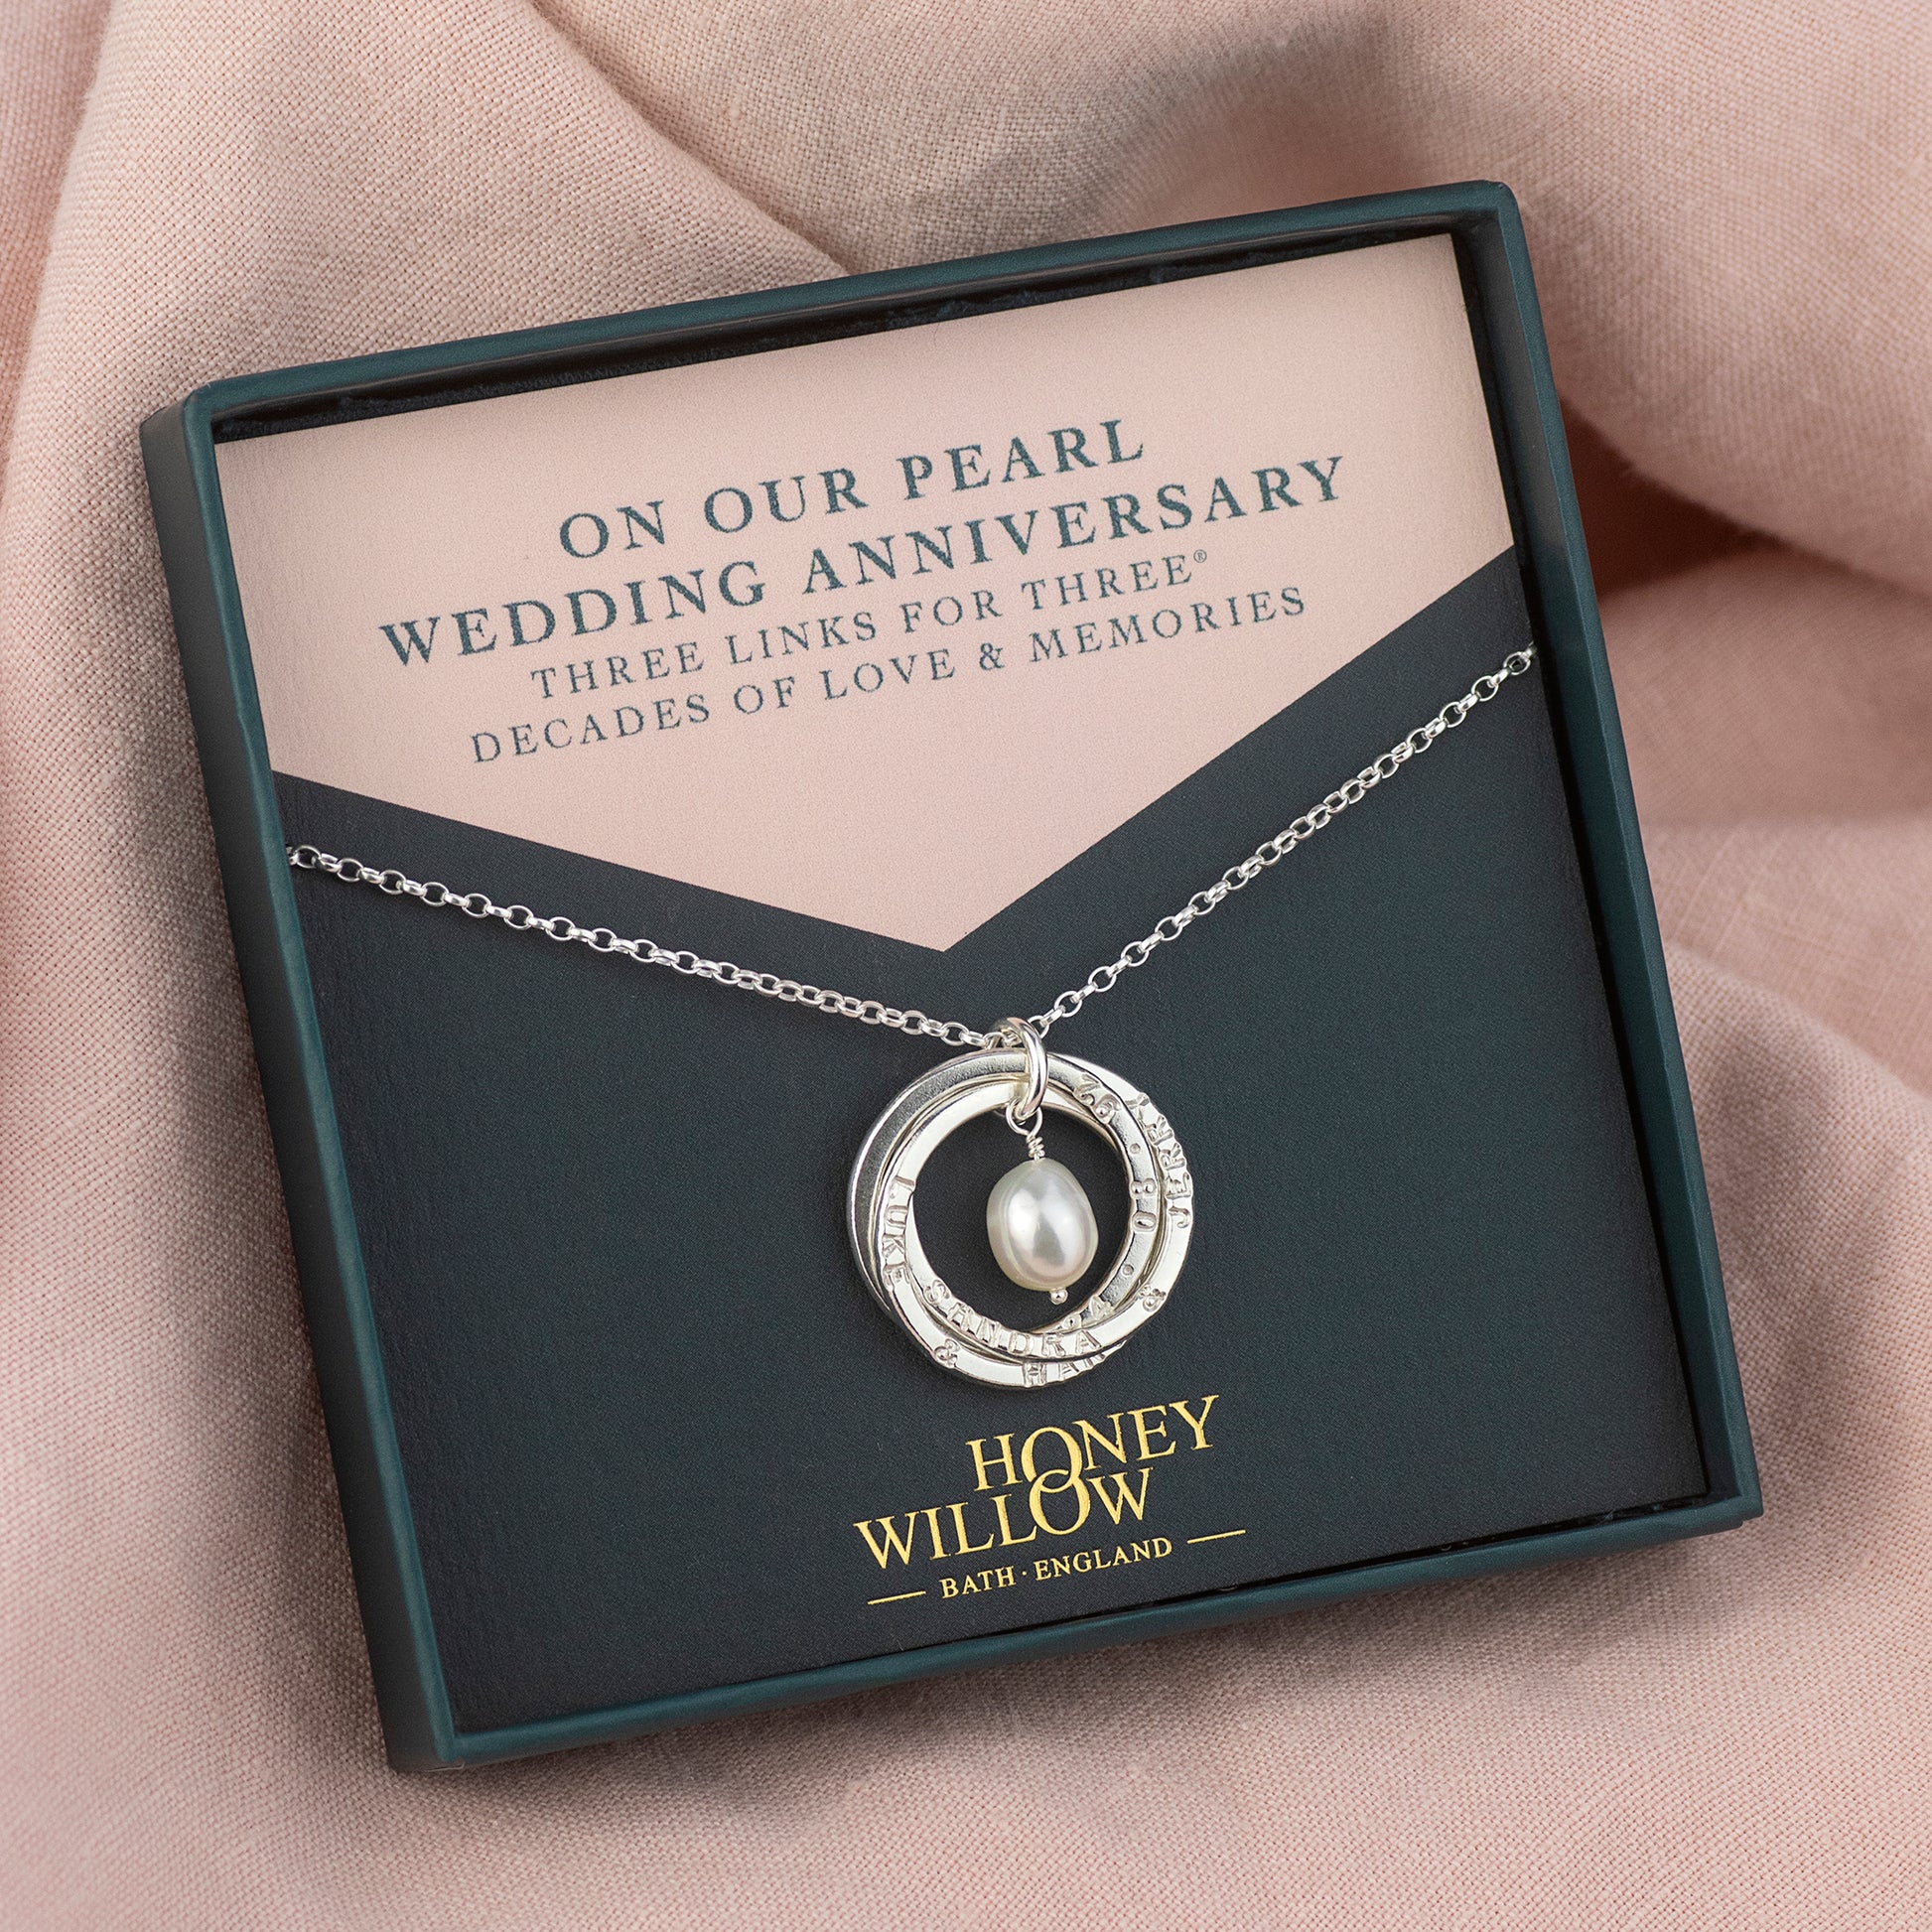 Personalised Pearl Anniversary Necklace - 30th Anniversary Gift